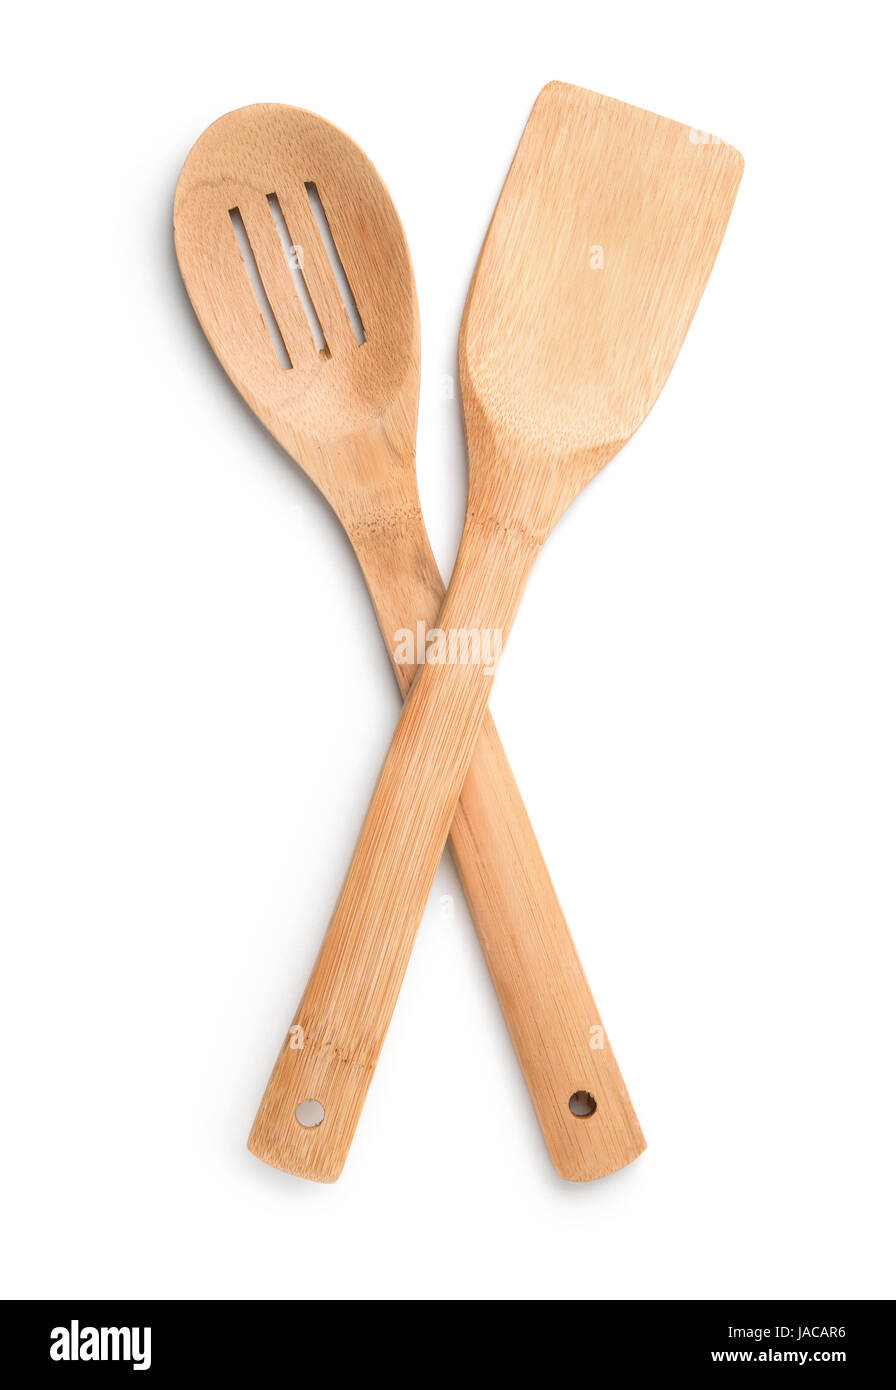 https://c8.alamy.com/comp/JACAR6/top-view-of-wooden-kitchen-spoon-and-spatula-isolated-on-white-JACAR6.jpg